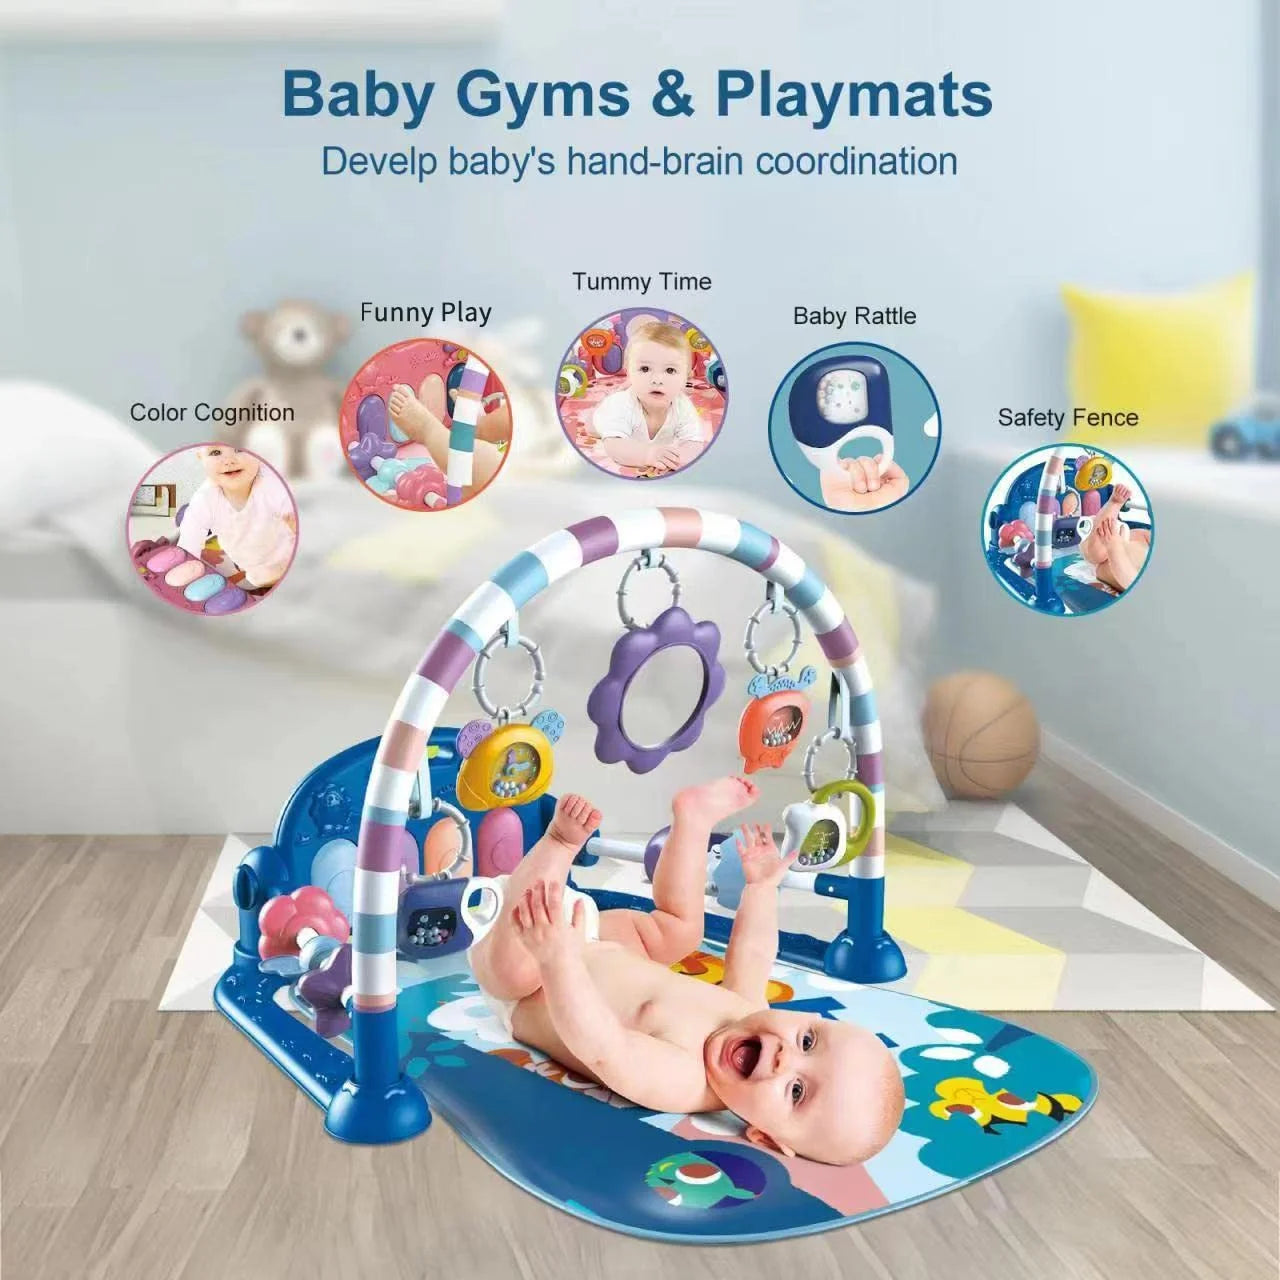 Baby Gym Play Mat 3 in 1 Fitness Rack with Music and Lights Fun Piano Baby Activity Center,Blue